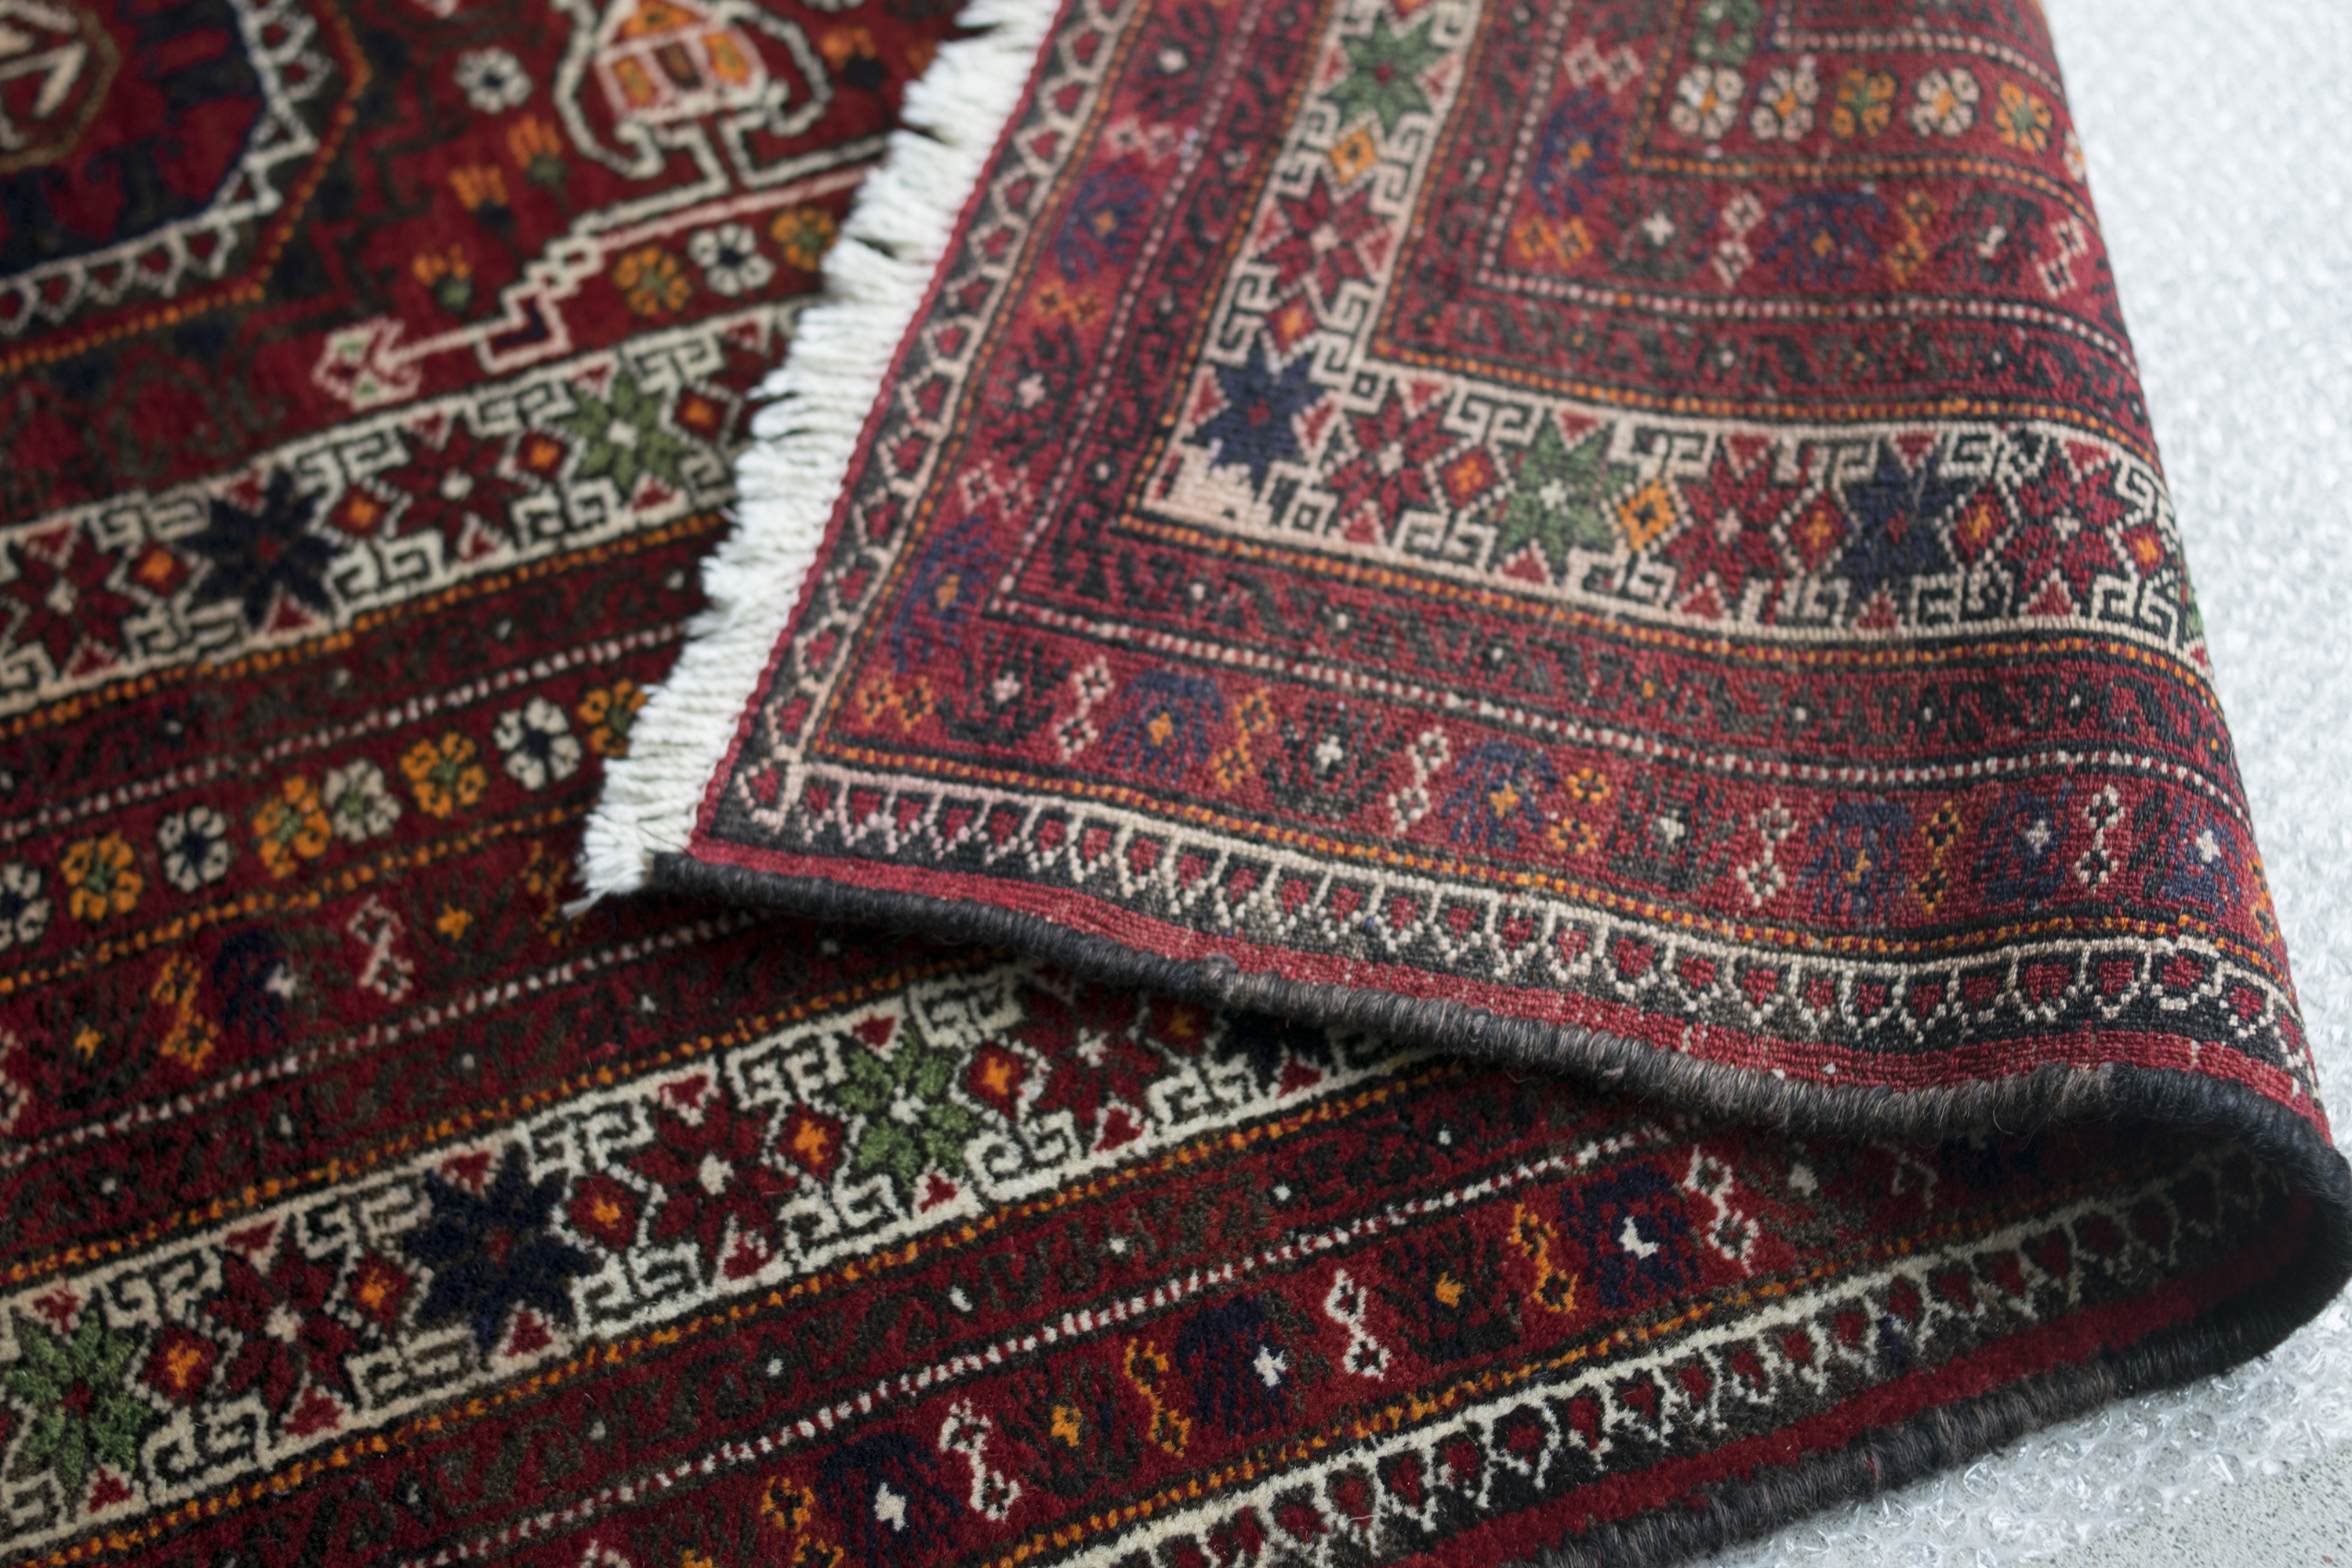 Tribal rug by “Baluch related tribe”